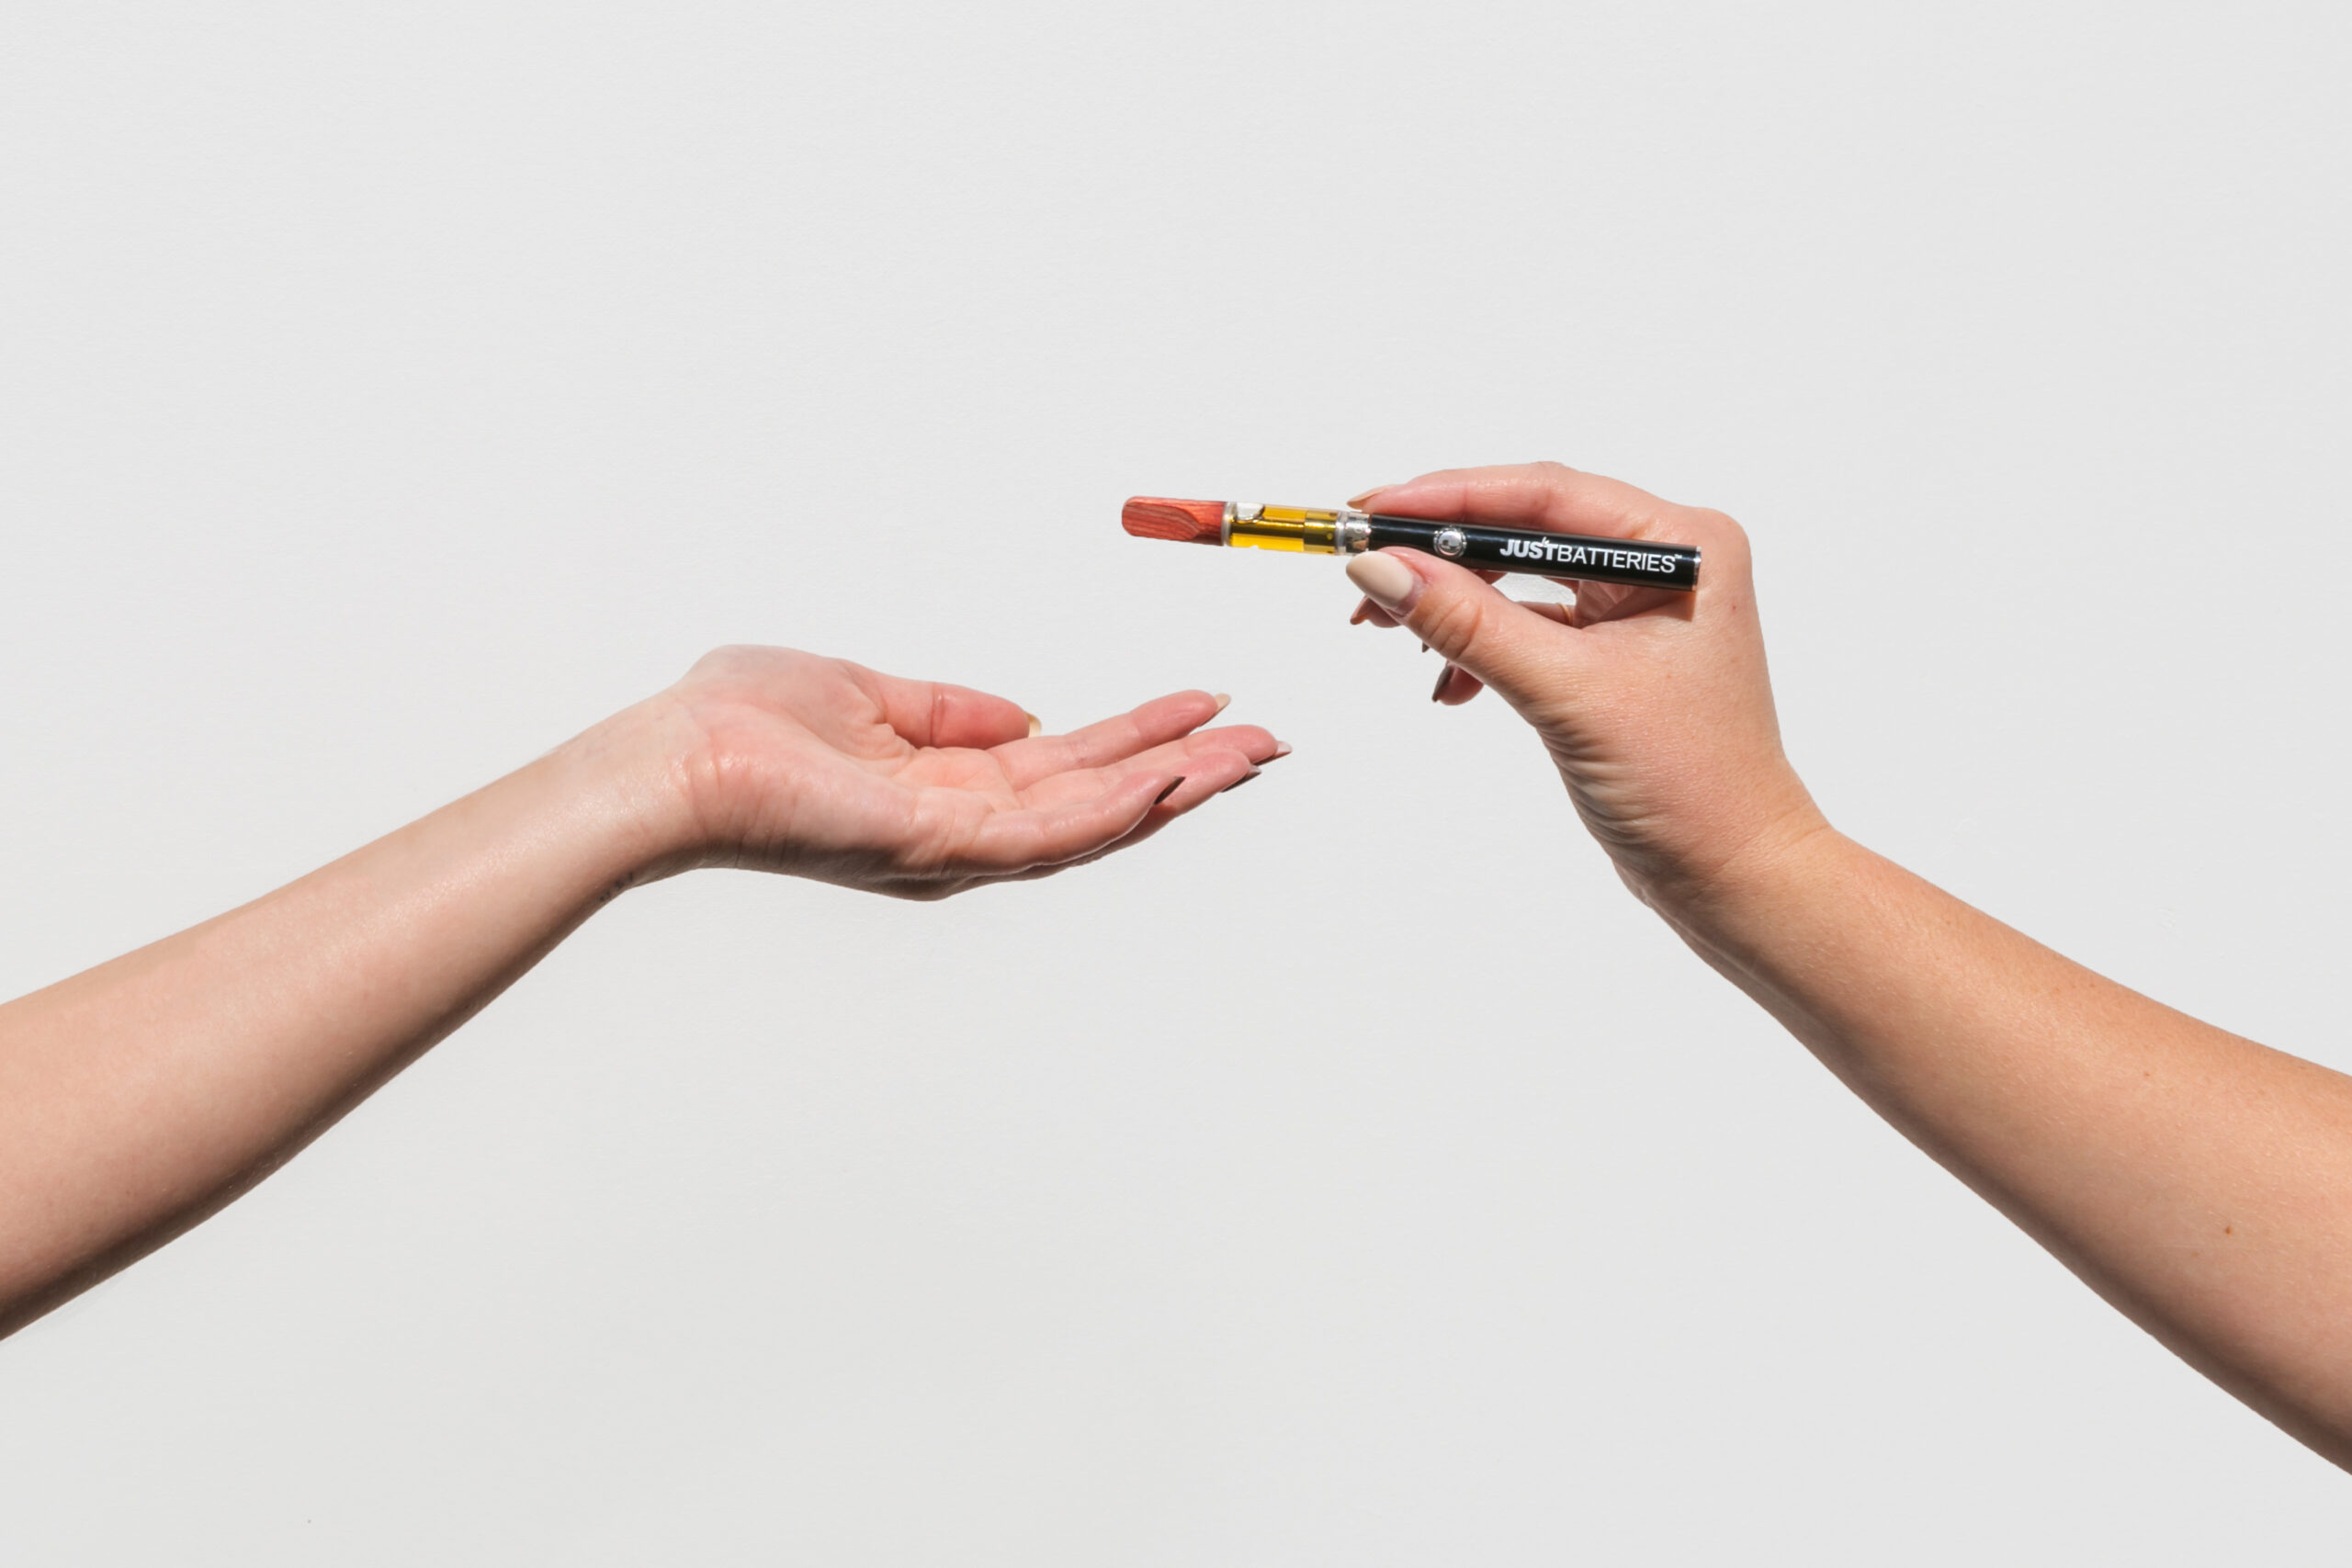 WHAT ARE THE BENEFITS OF A DISPOSABLE CBD VAPE PEN?